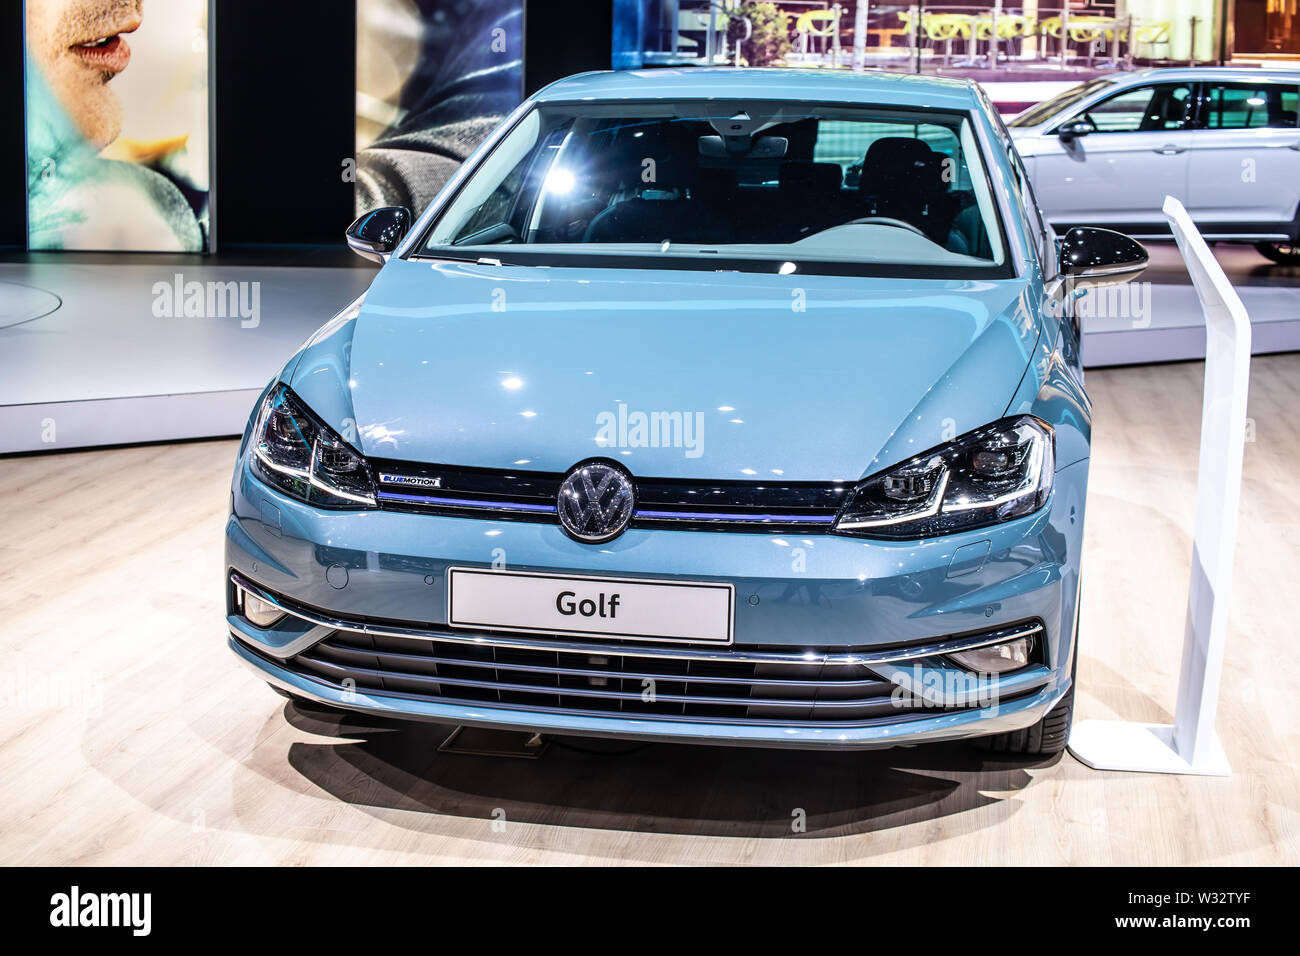 Vw Golf High Resolution Stock and Images - Alamy